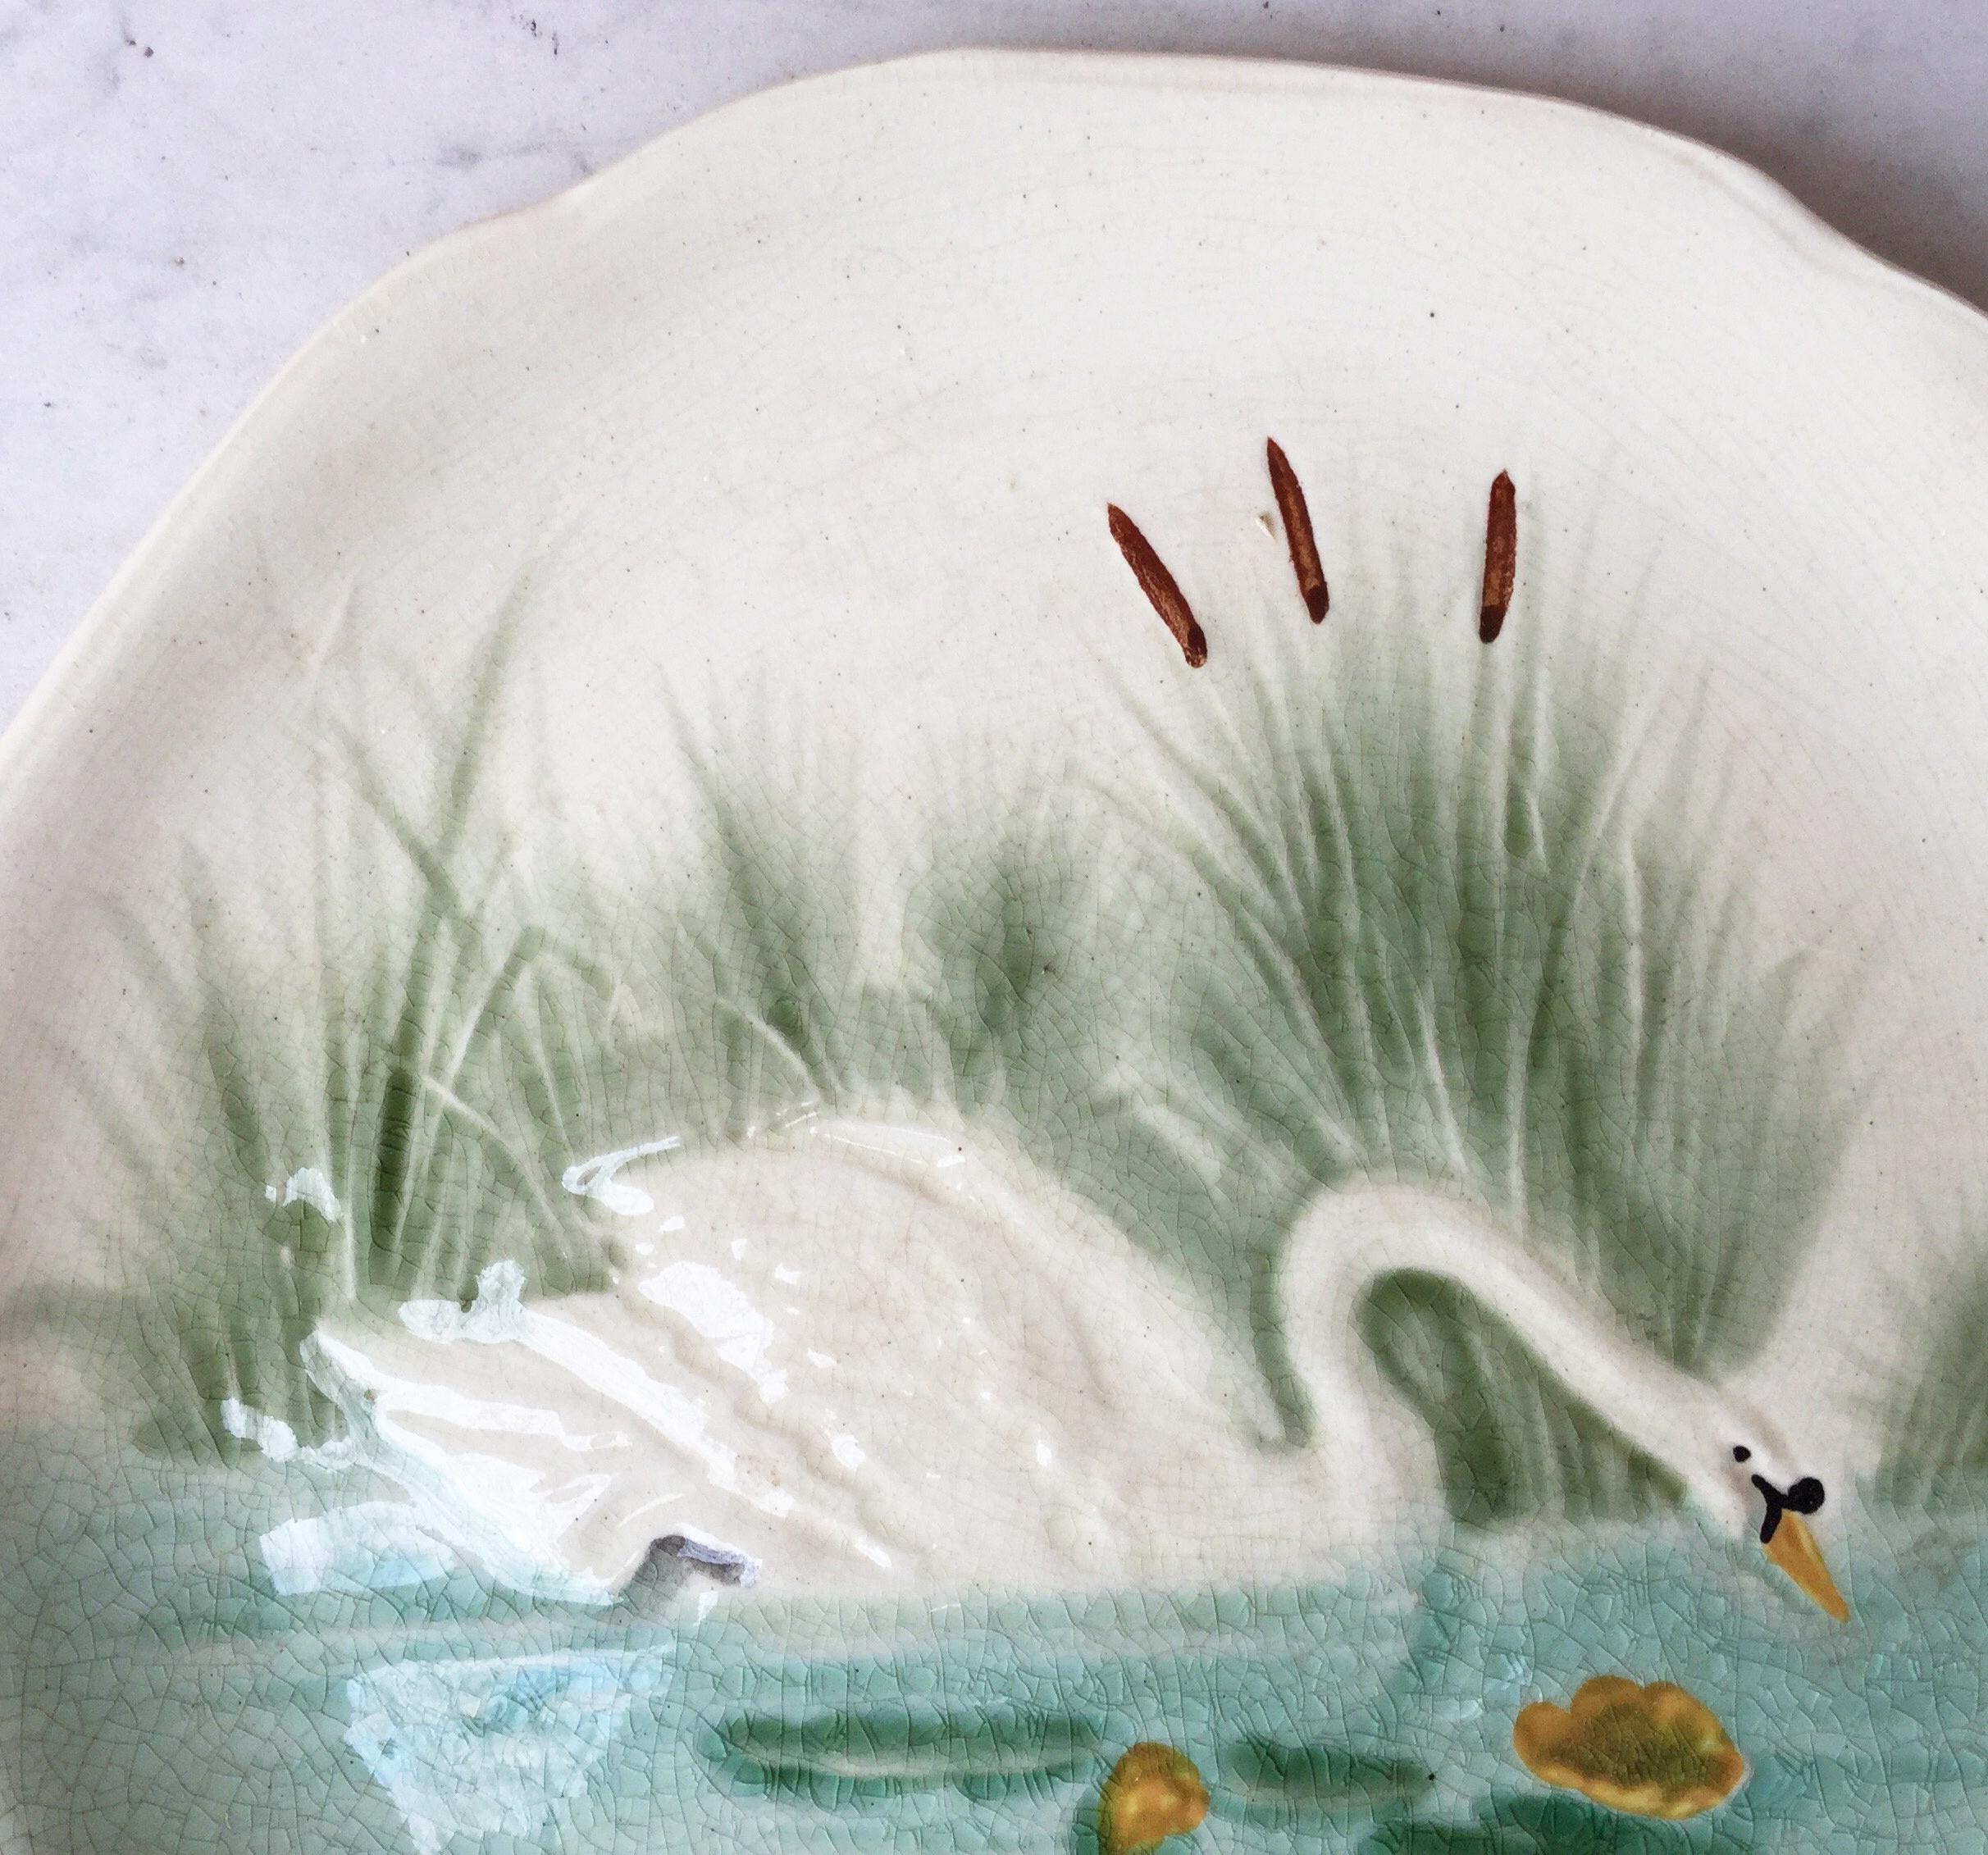 Majolica plate with a swan on a pond signed Hippolyte Boulenger Choisy le Roi, circa 1890.
The manufacture of Choisy le Roi was one of the most important manufacture at the end of 19th century, they produced very high quality ceramics of all kinds